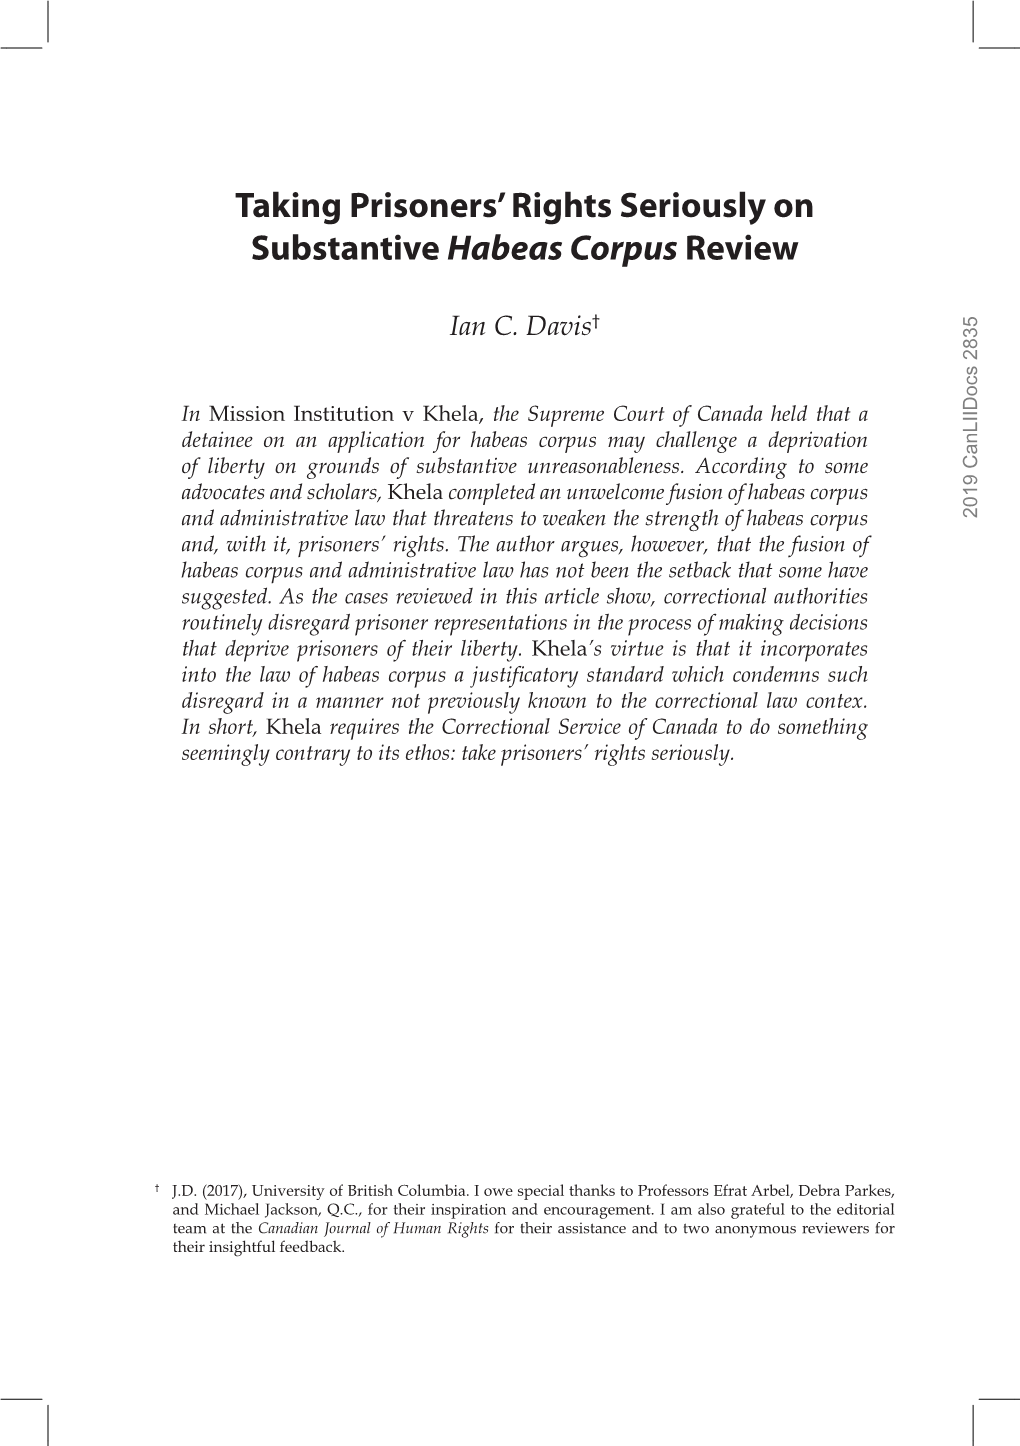 Taking Prisoners' Rights Seriously on Substantive Habeas Corpus Review